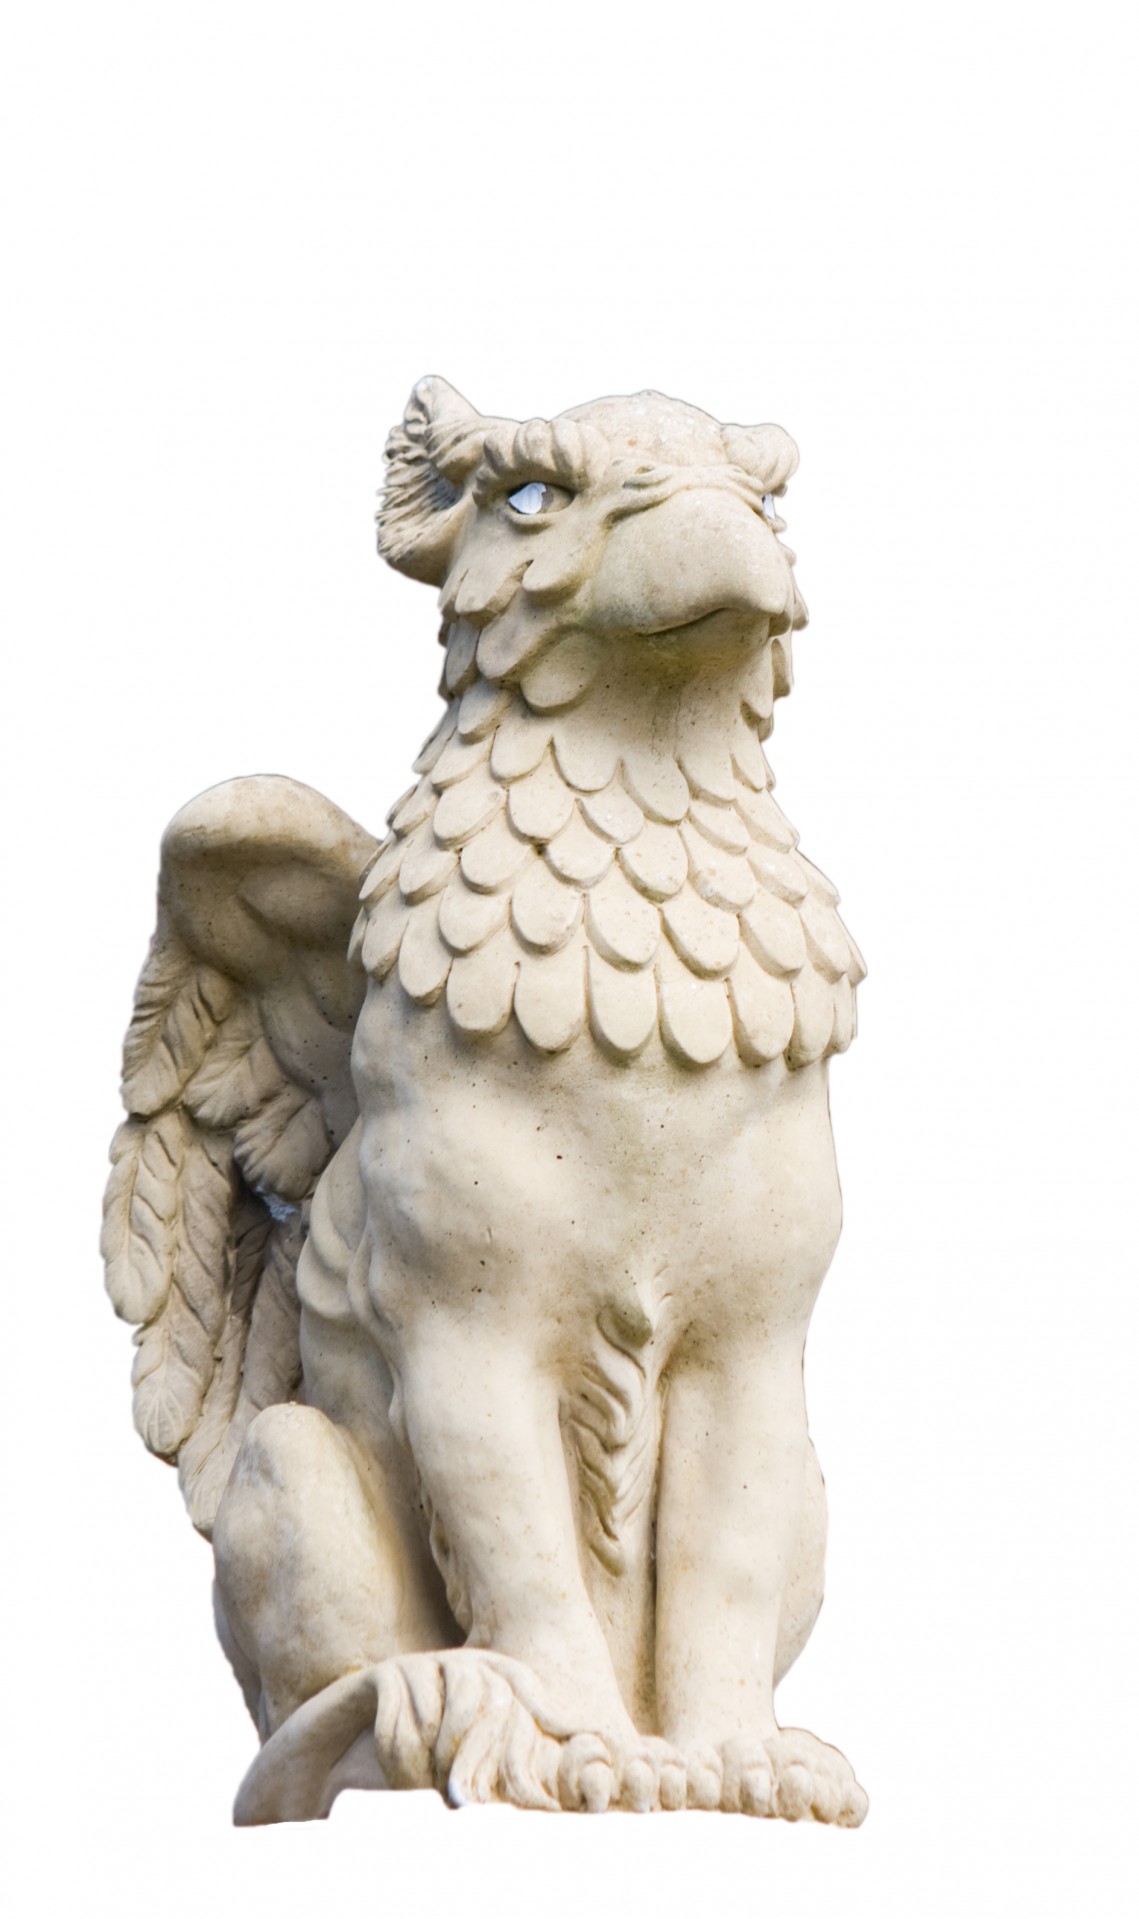 Griffin bird statue isolated on white background